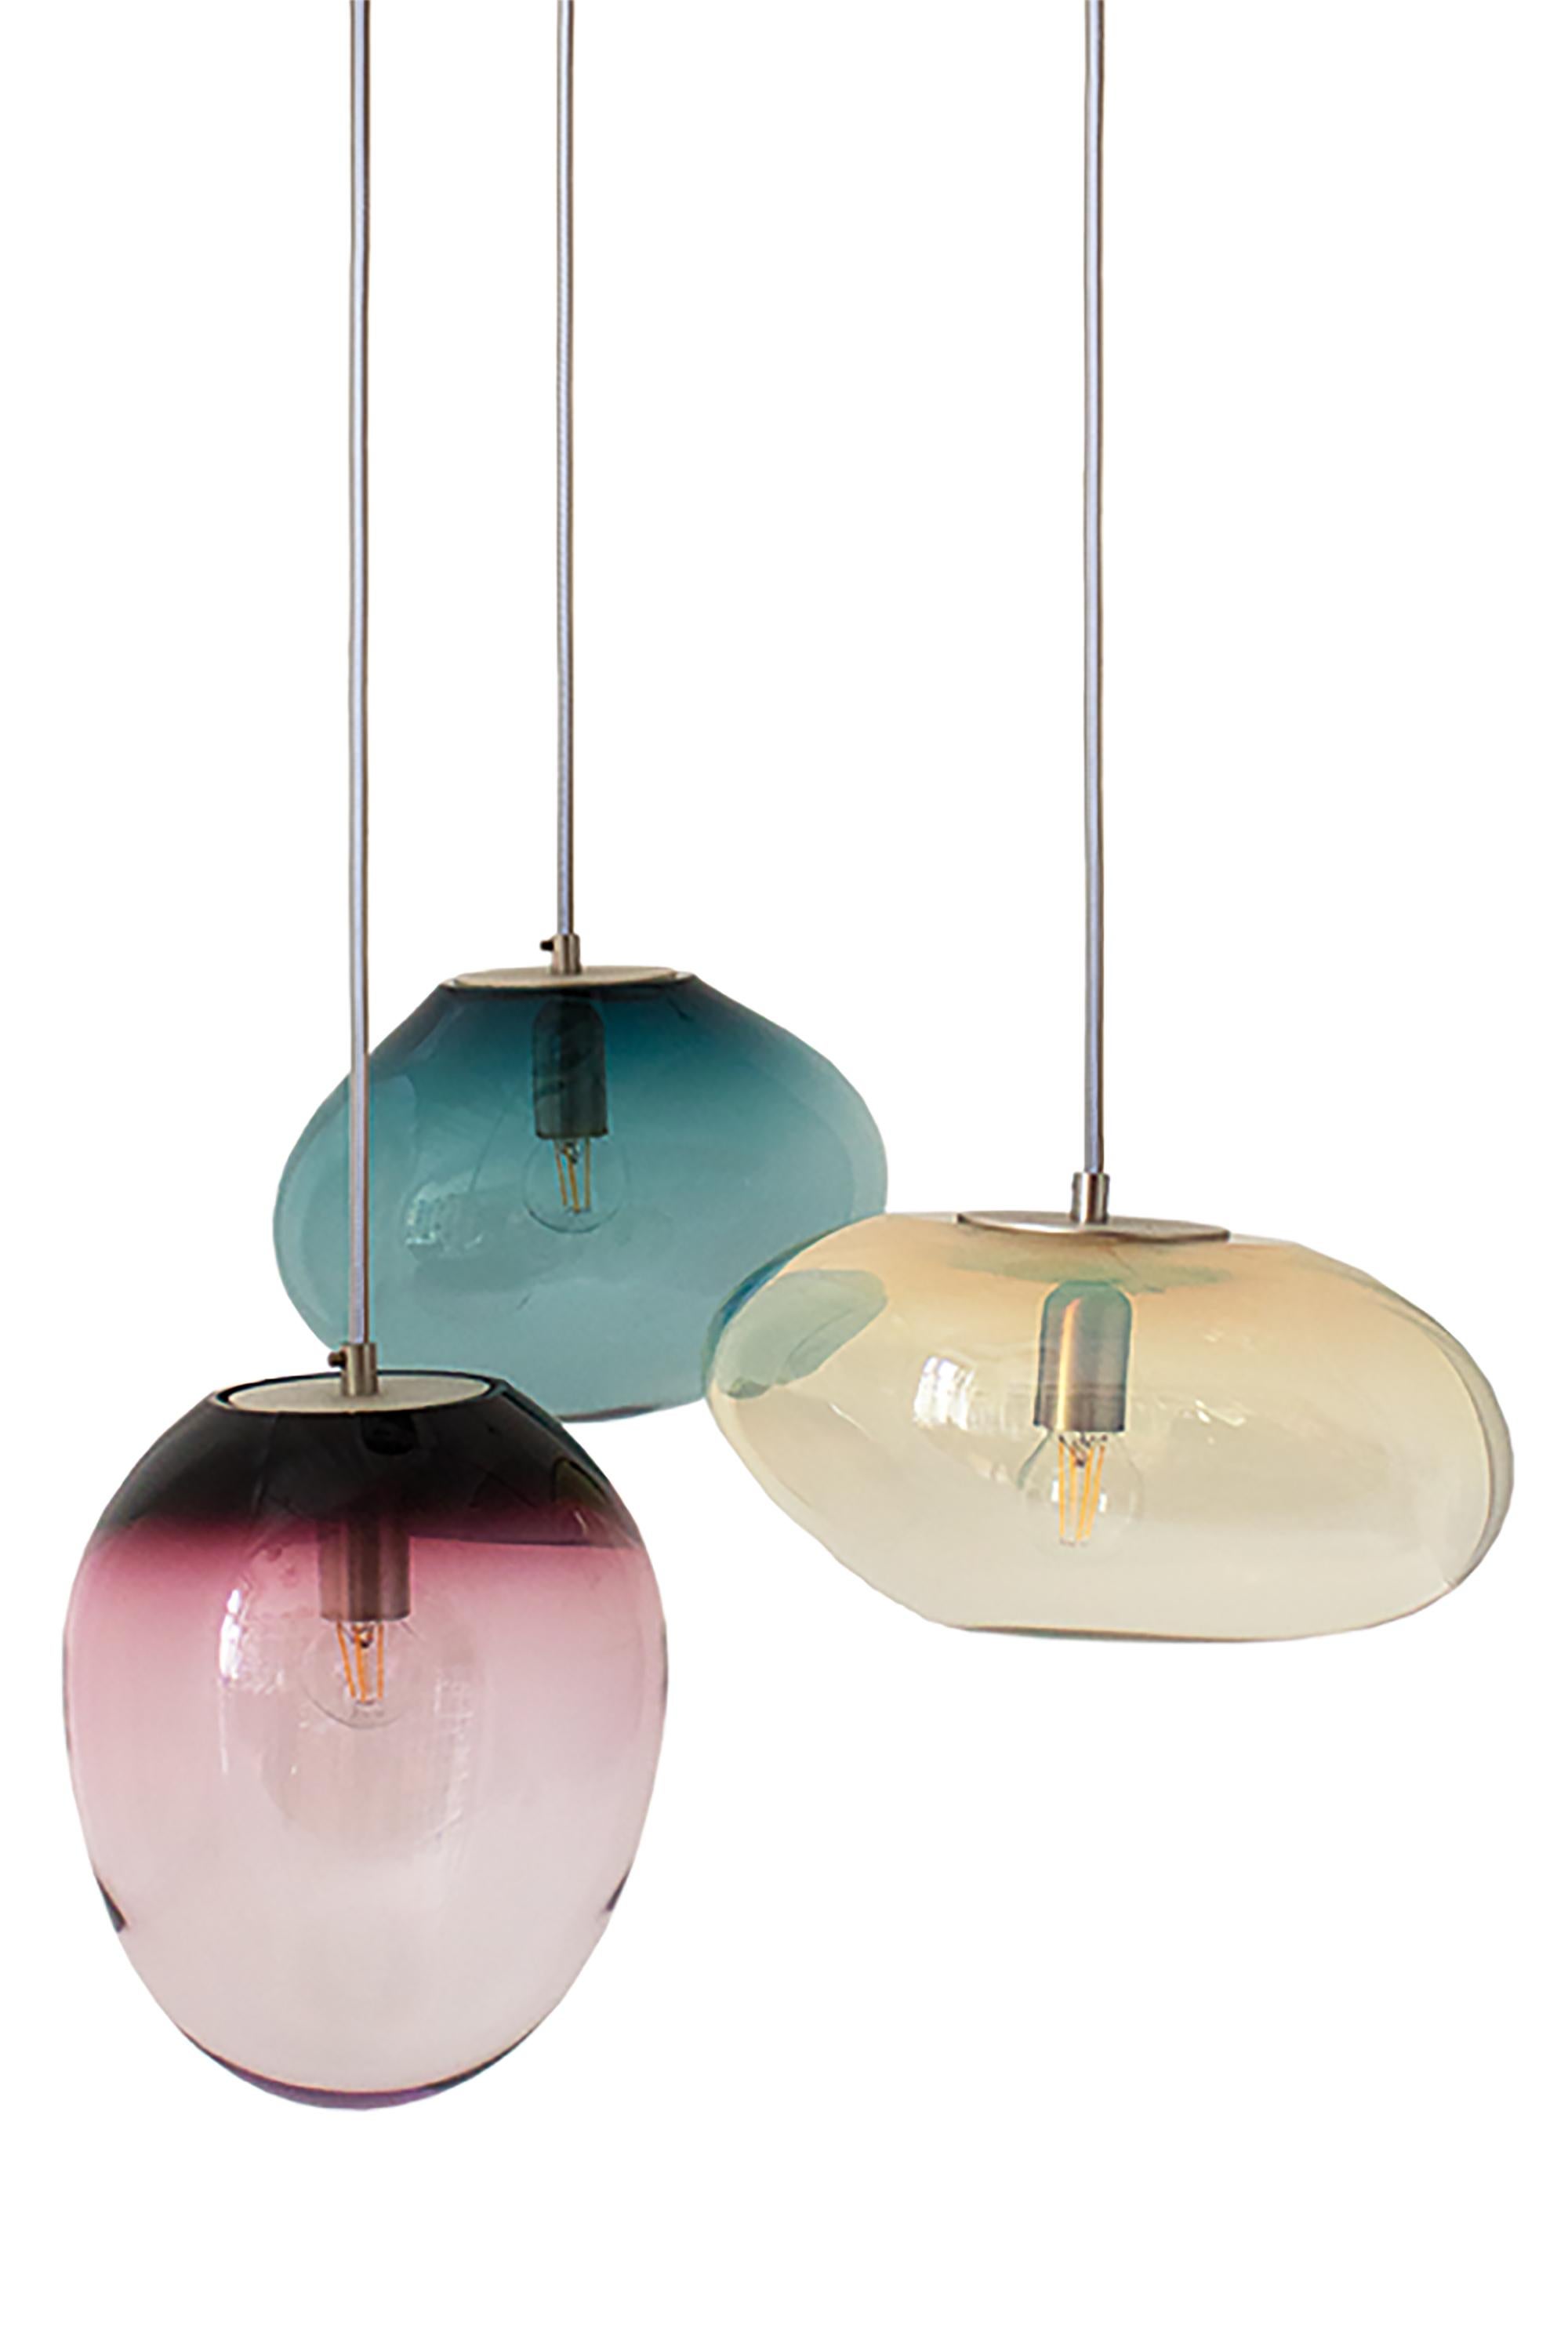 Set of 3 Planetoide pendants by ELOA
No UL listed 
Material: glass, steel, silver, LED bulb
Dimensions: D30 x W30 x H250 cm
Also available in different colours and dimensions.

All our lamps can be wired according to each country. If sold to the USA